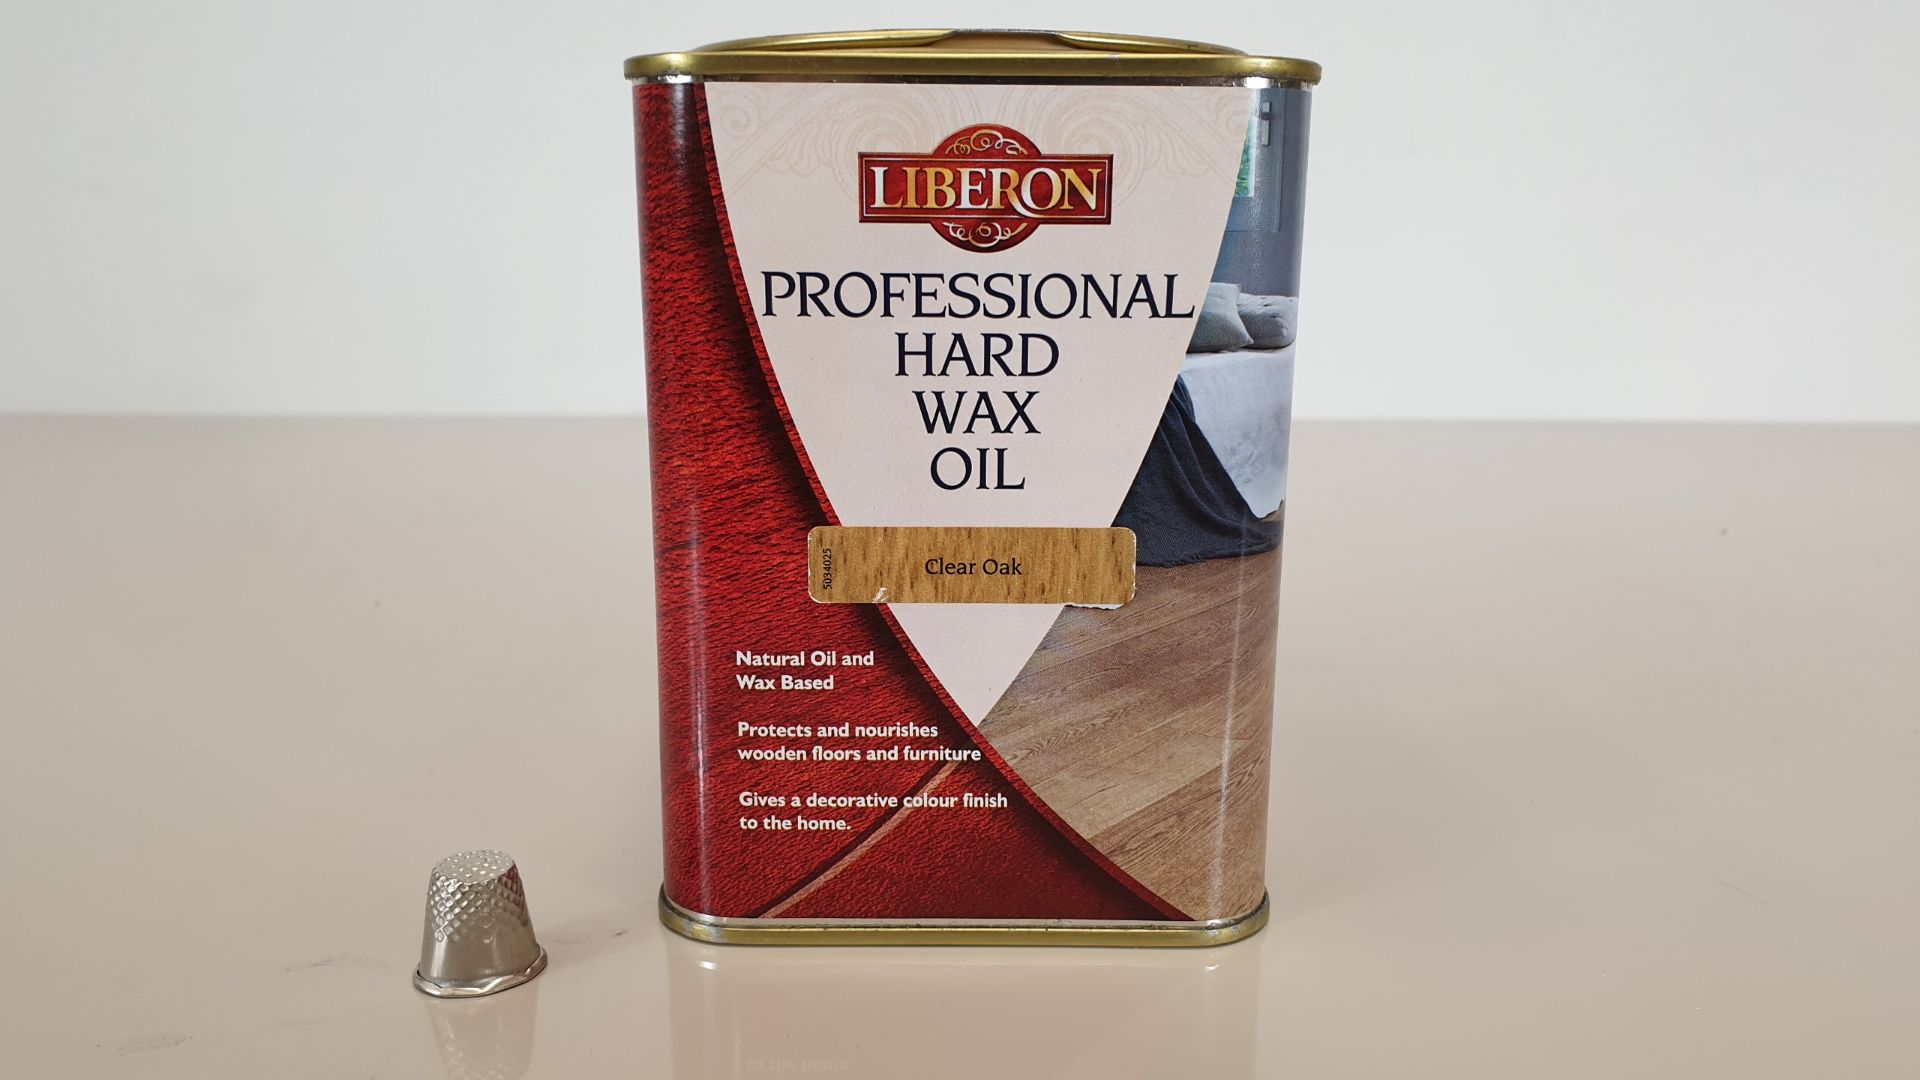 (LOT FOR THURSDAY 28TH MAY AUCTION) 20 X LIBERON 1 LITRE PROFESSIONAL HARD WAX OIL - CLEAR OAK